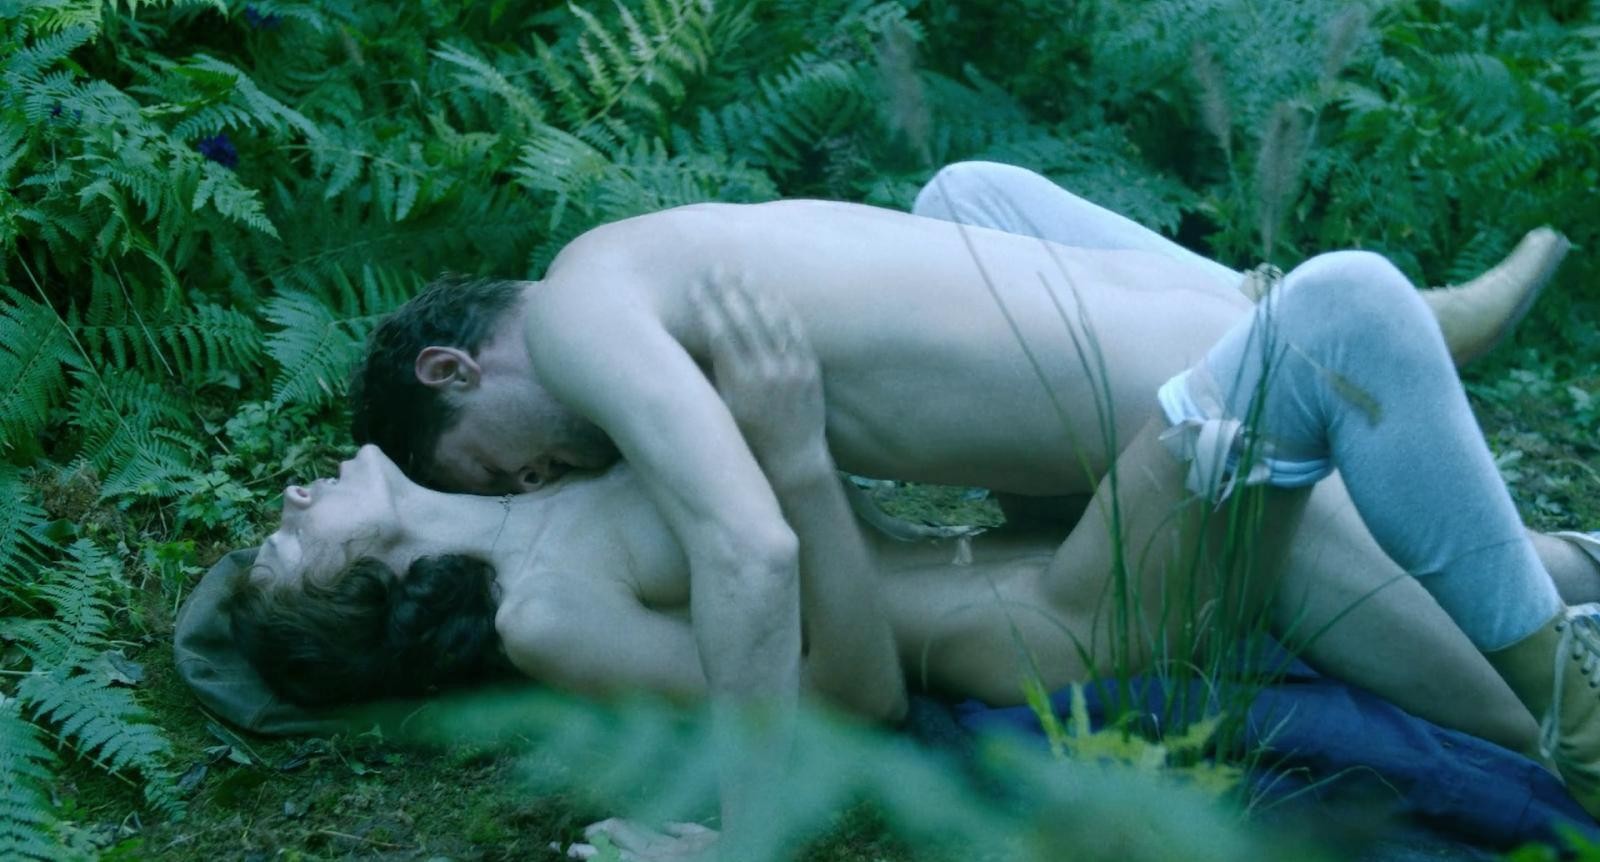 Lady chatterley's lover 2015 watch